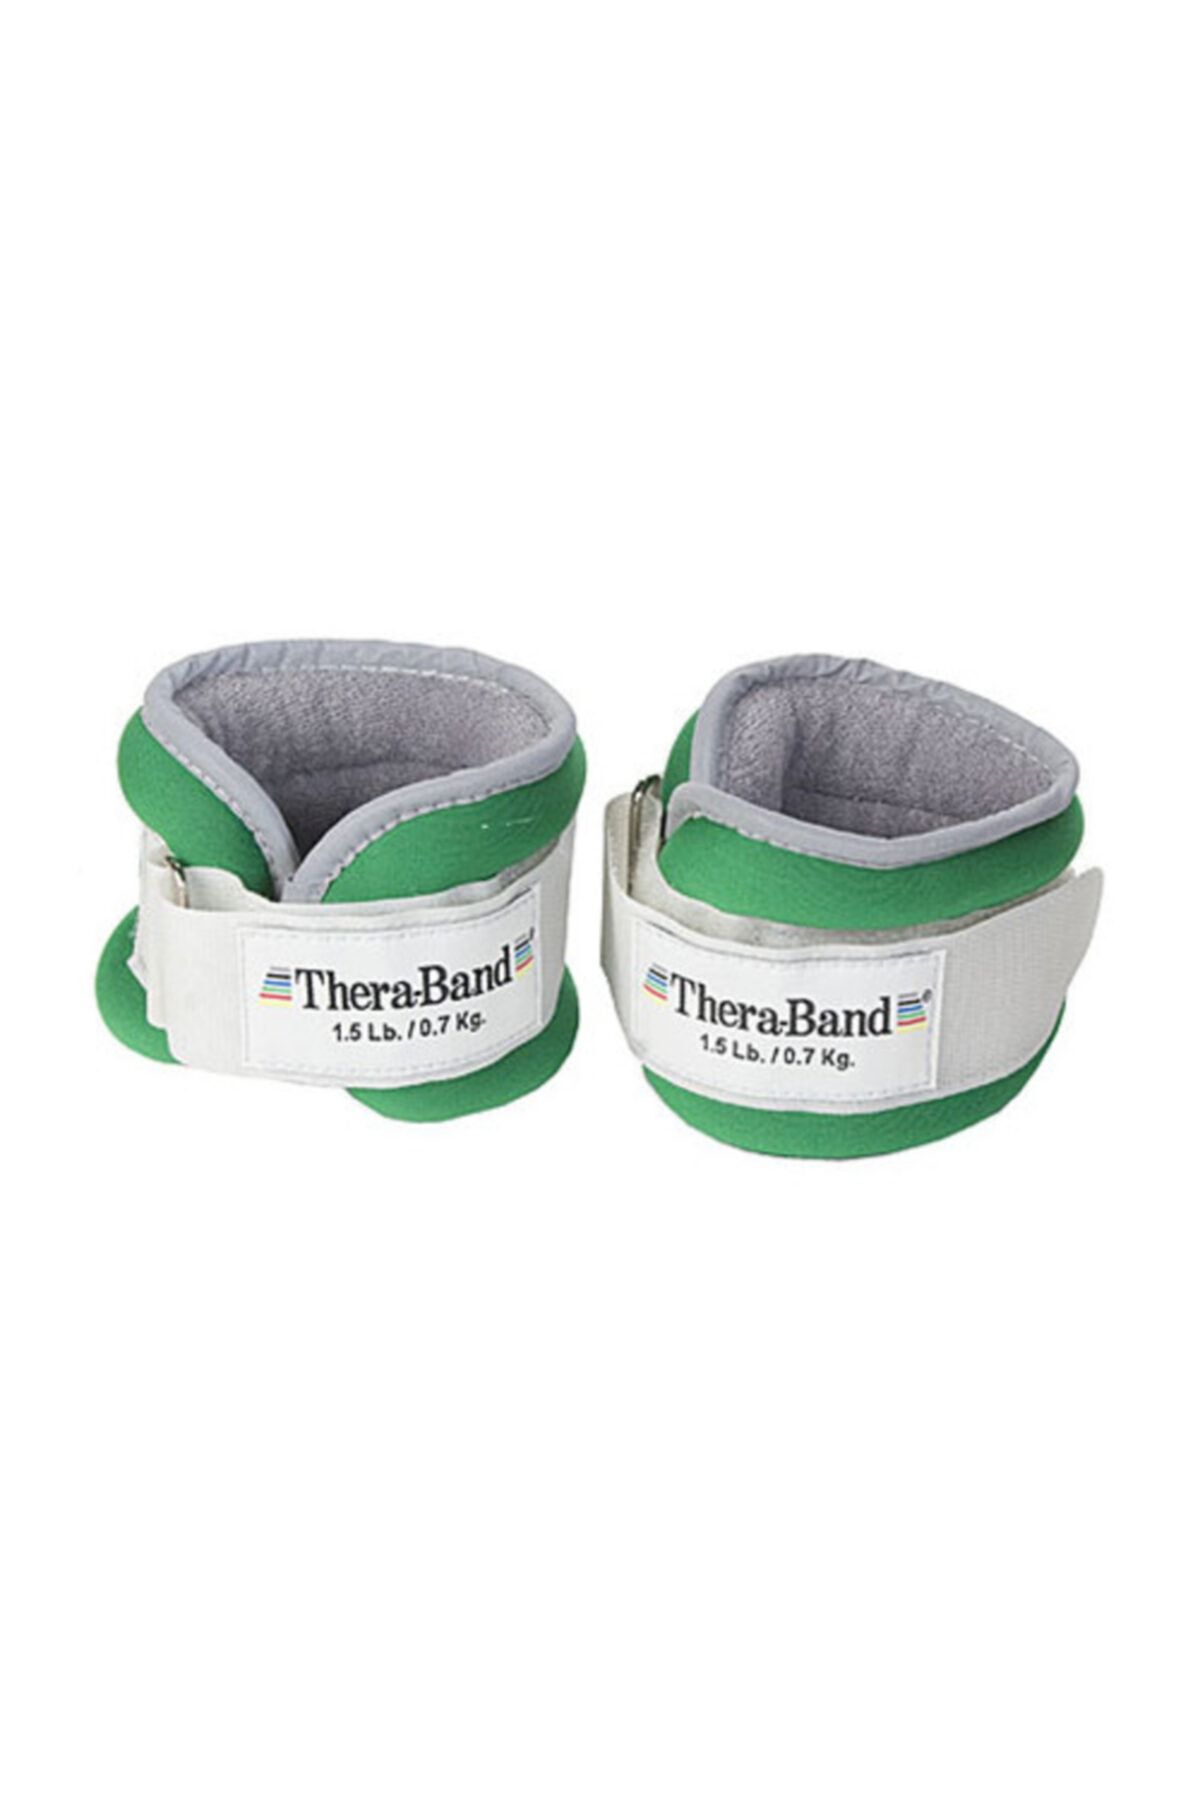 Theraband COMFORT ANKLE WEIGHTS GRN 3 LB